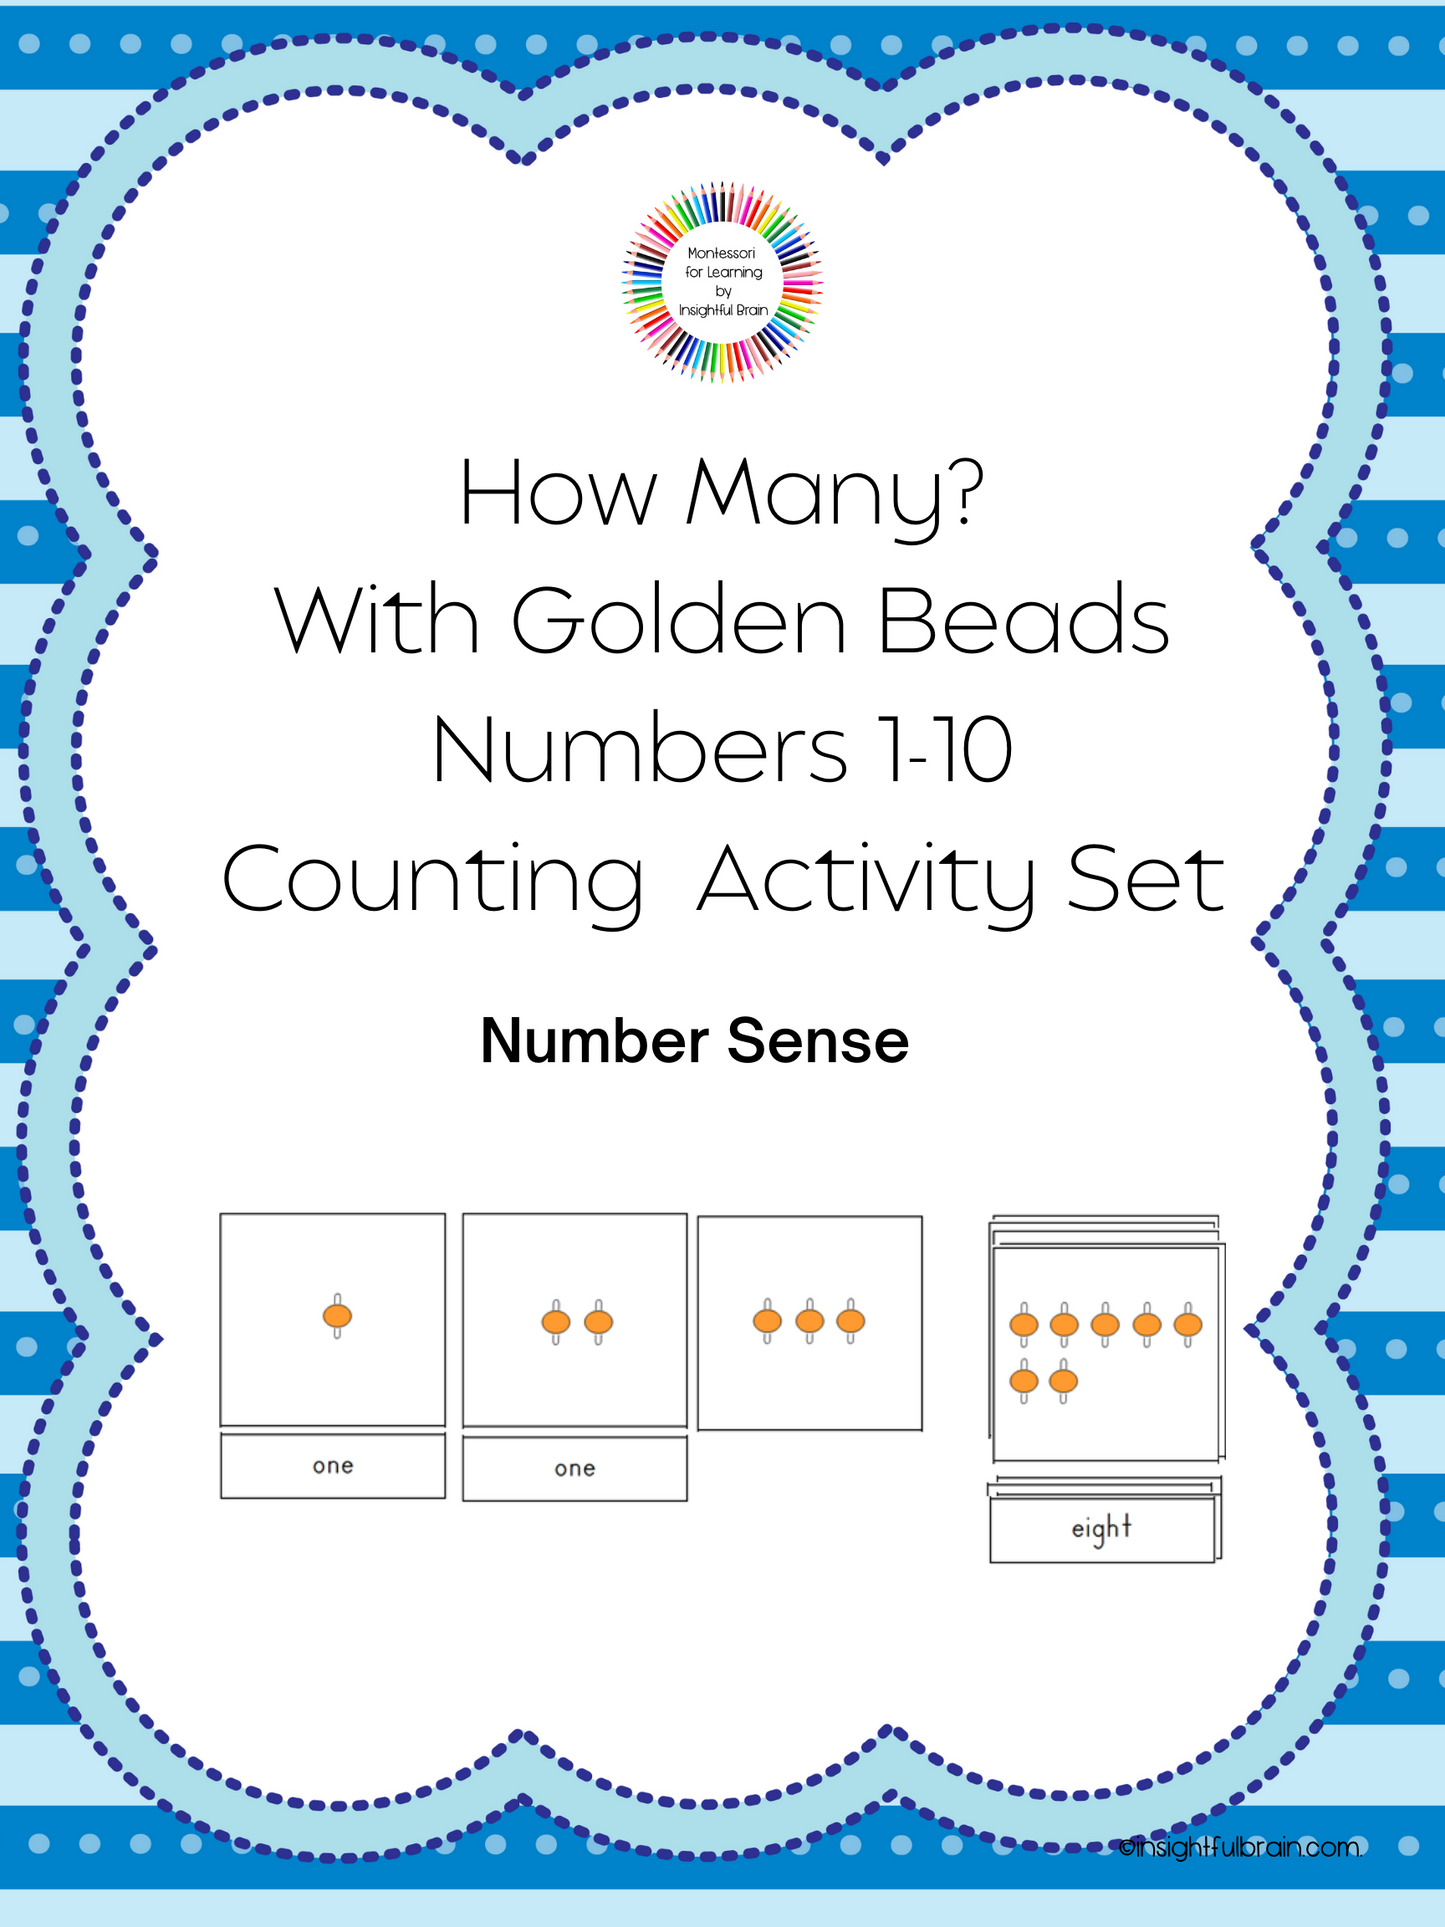 How Many? With Golden Beads Counting 1-10 Activity Set